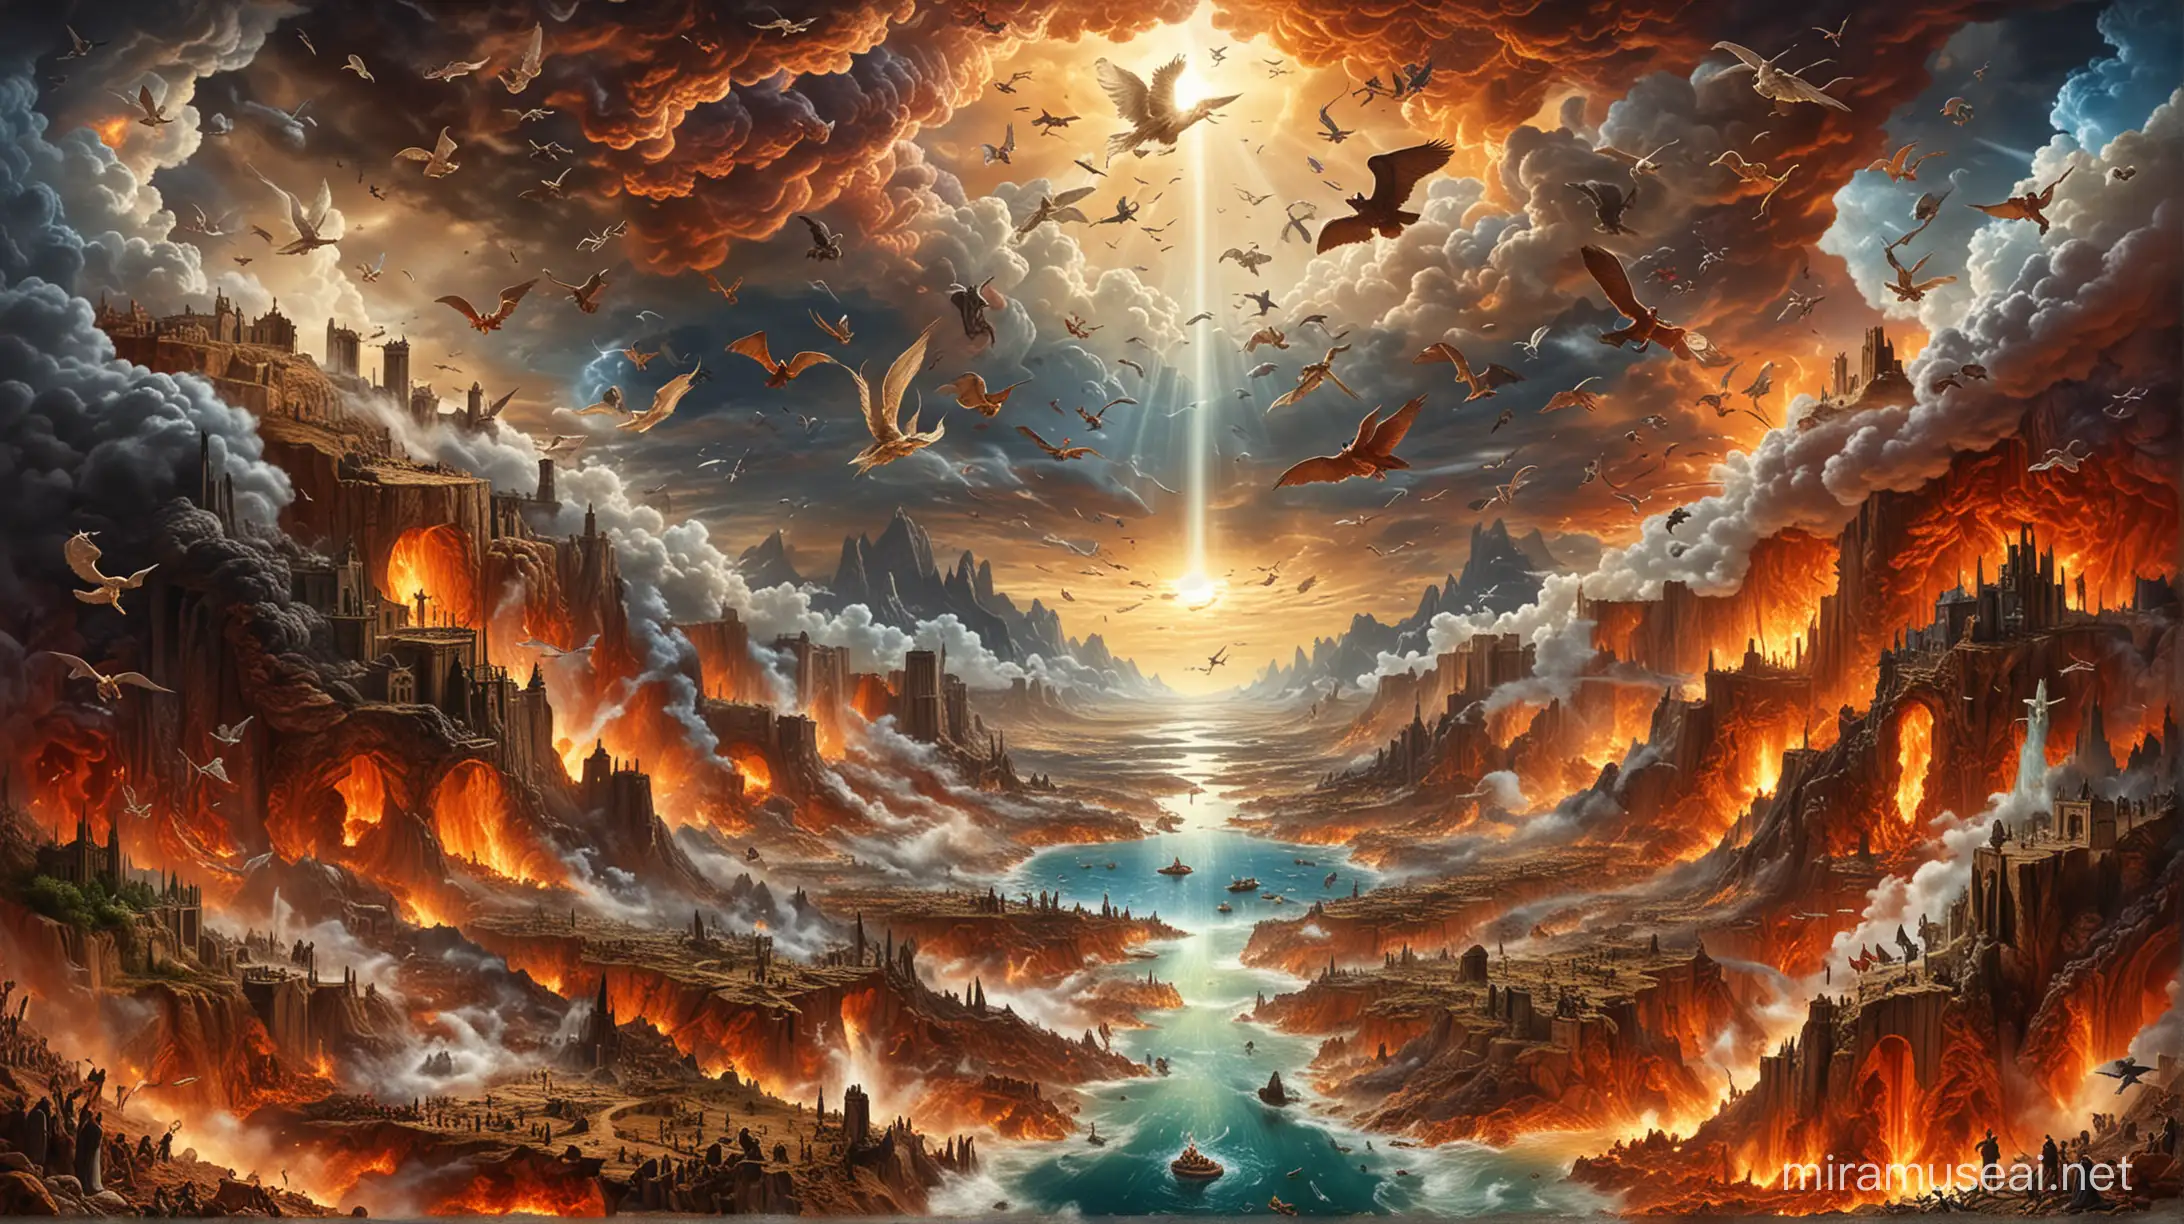 Detailed Depiction of Heaven Hell and Earth Combined in One Image